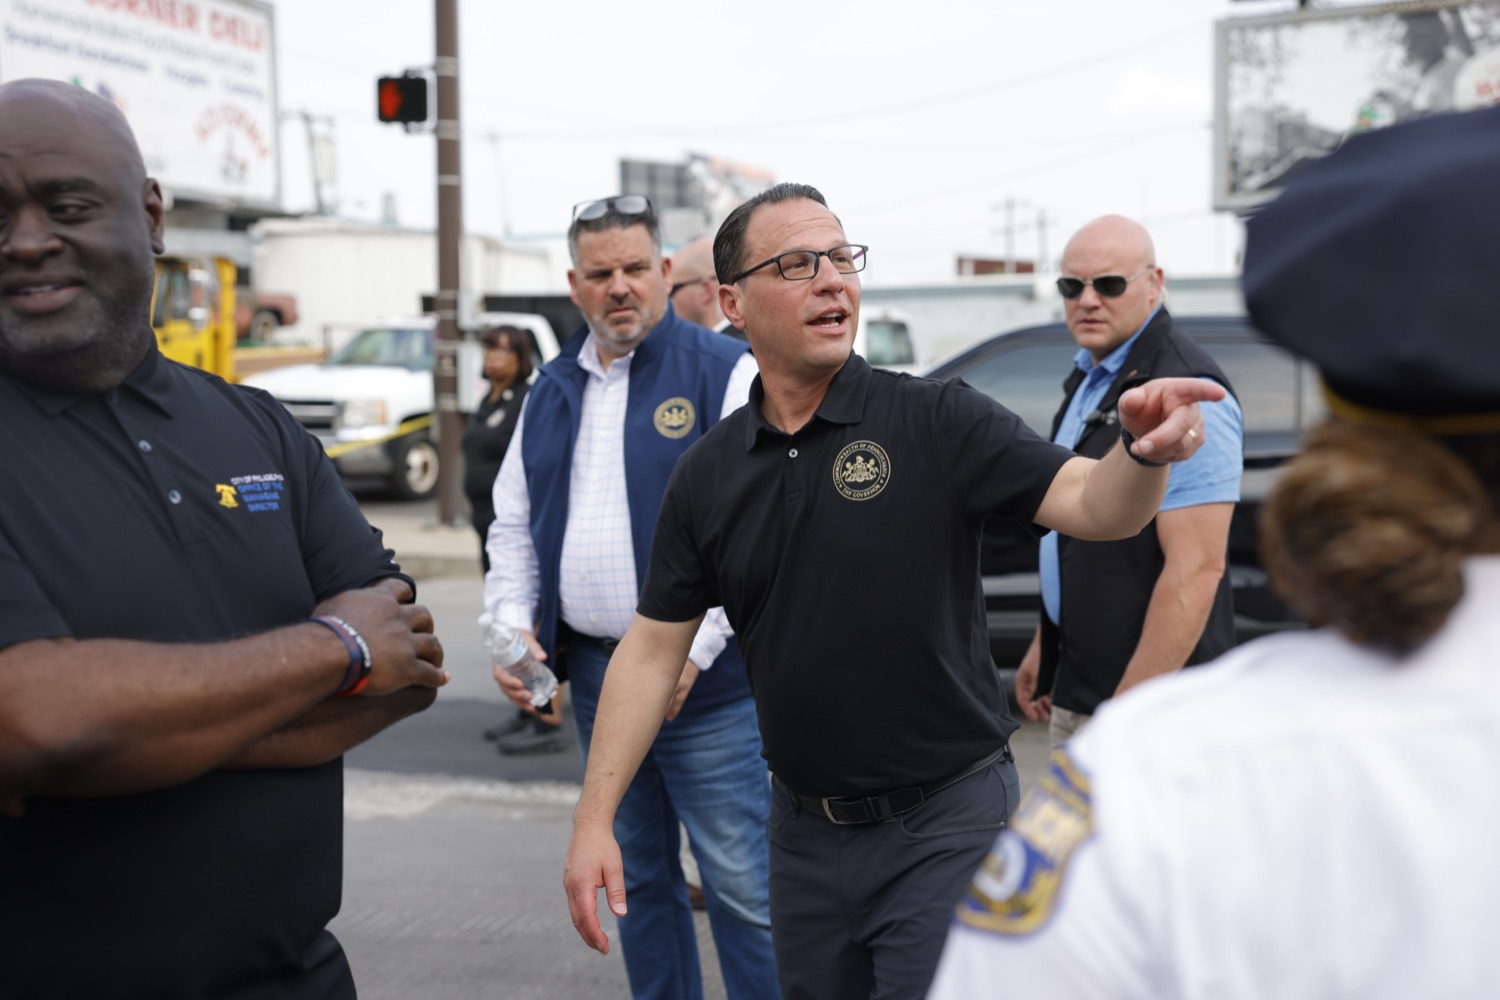 Governor Josh Shapiro, along with officials from the Shapiro Administration, the City of Philadelphia, and SEPTA provided an update on the response to the vehicle fire on the Route 73/Cottman Avenue ramp under Interstate 95 in Philadelphia, which caused the roadway in this area to partially collapse, and heavily damaged the southbound structure. The interstate is closed in both directions..."Interstate 95 is a critical artery that supports our economy and plays an important role in Pennsylvanians' day to day lives. My Administration is all hands on deck to repair this safely and as efficiently as possible," said Governor Shapiro. "We will rebuild and recover - and in the meantime, we will make sure people can get to where they need to go safely."..This morning, according to first responders in Philadelphia and the Pennsylvania State Police, at approximately 6:20am, a vehicle fire under I-95 near the Cottman Avenue exit in Northeast Philadelphia caused a portion of the highway to collapse. Preliminary reports indicate a commercial truck carrying a petroleum-based product was the source of the fire. Since the crash occurred, PEMA has also been on-site, coordinating response efforts with local and federal partners.  JUNE 11, 2023 - PHILADELPHIA, PA.<br><a href="https://filesource.amperwave.net/commonwealthofpa/photo/23248_gov_I95Collapse_dz_016.JPG" target="_blank">⇣ Download Photo</a>